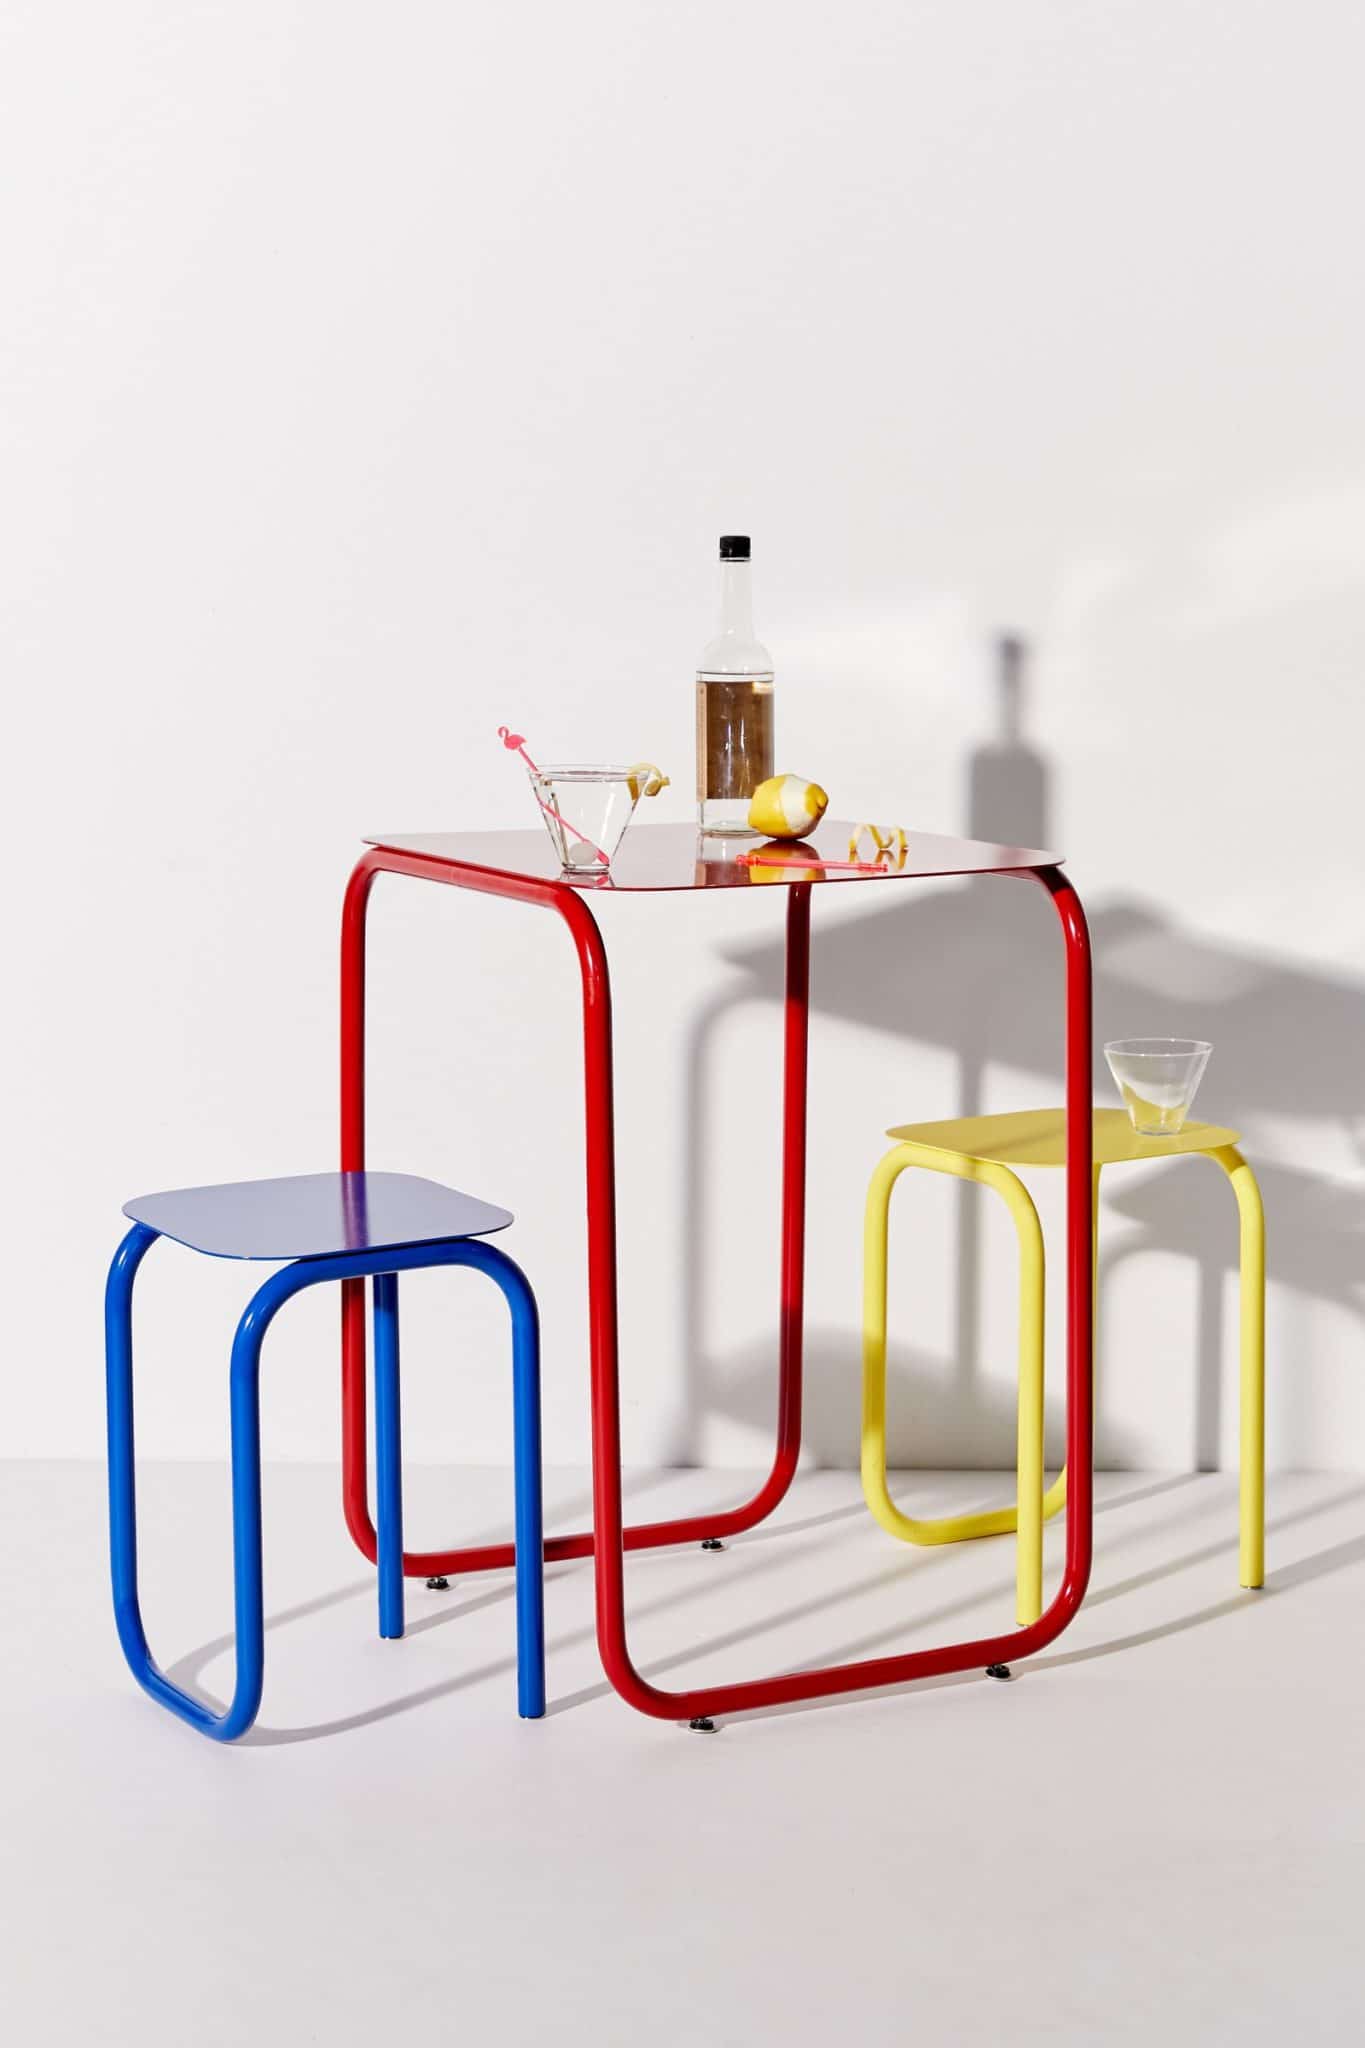 Urban-Outfitters-x-Clever-2019-Elise-McMahon-for-Likeminded-Objects-dining-set-huskdesignblog